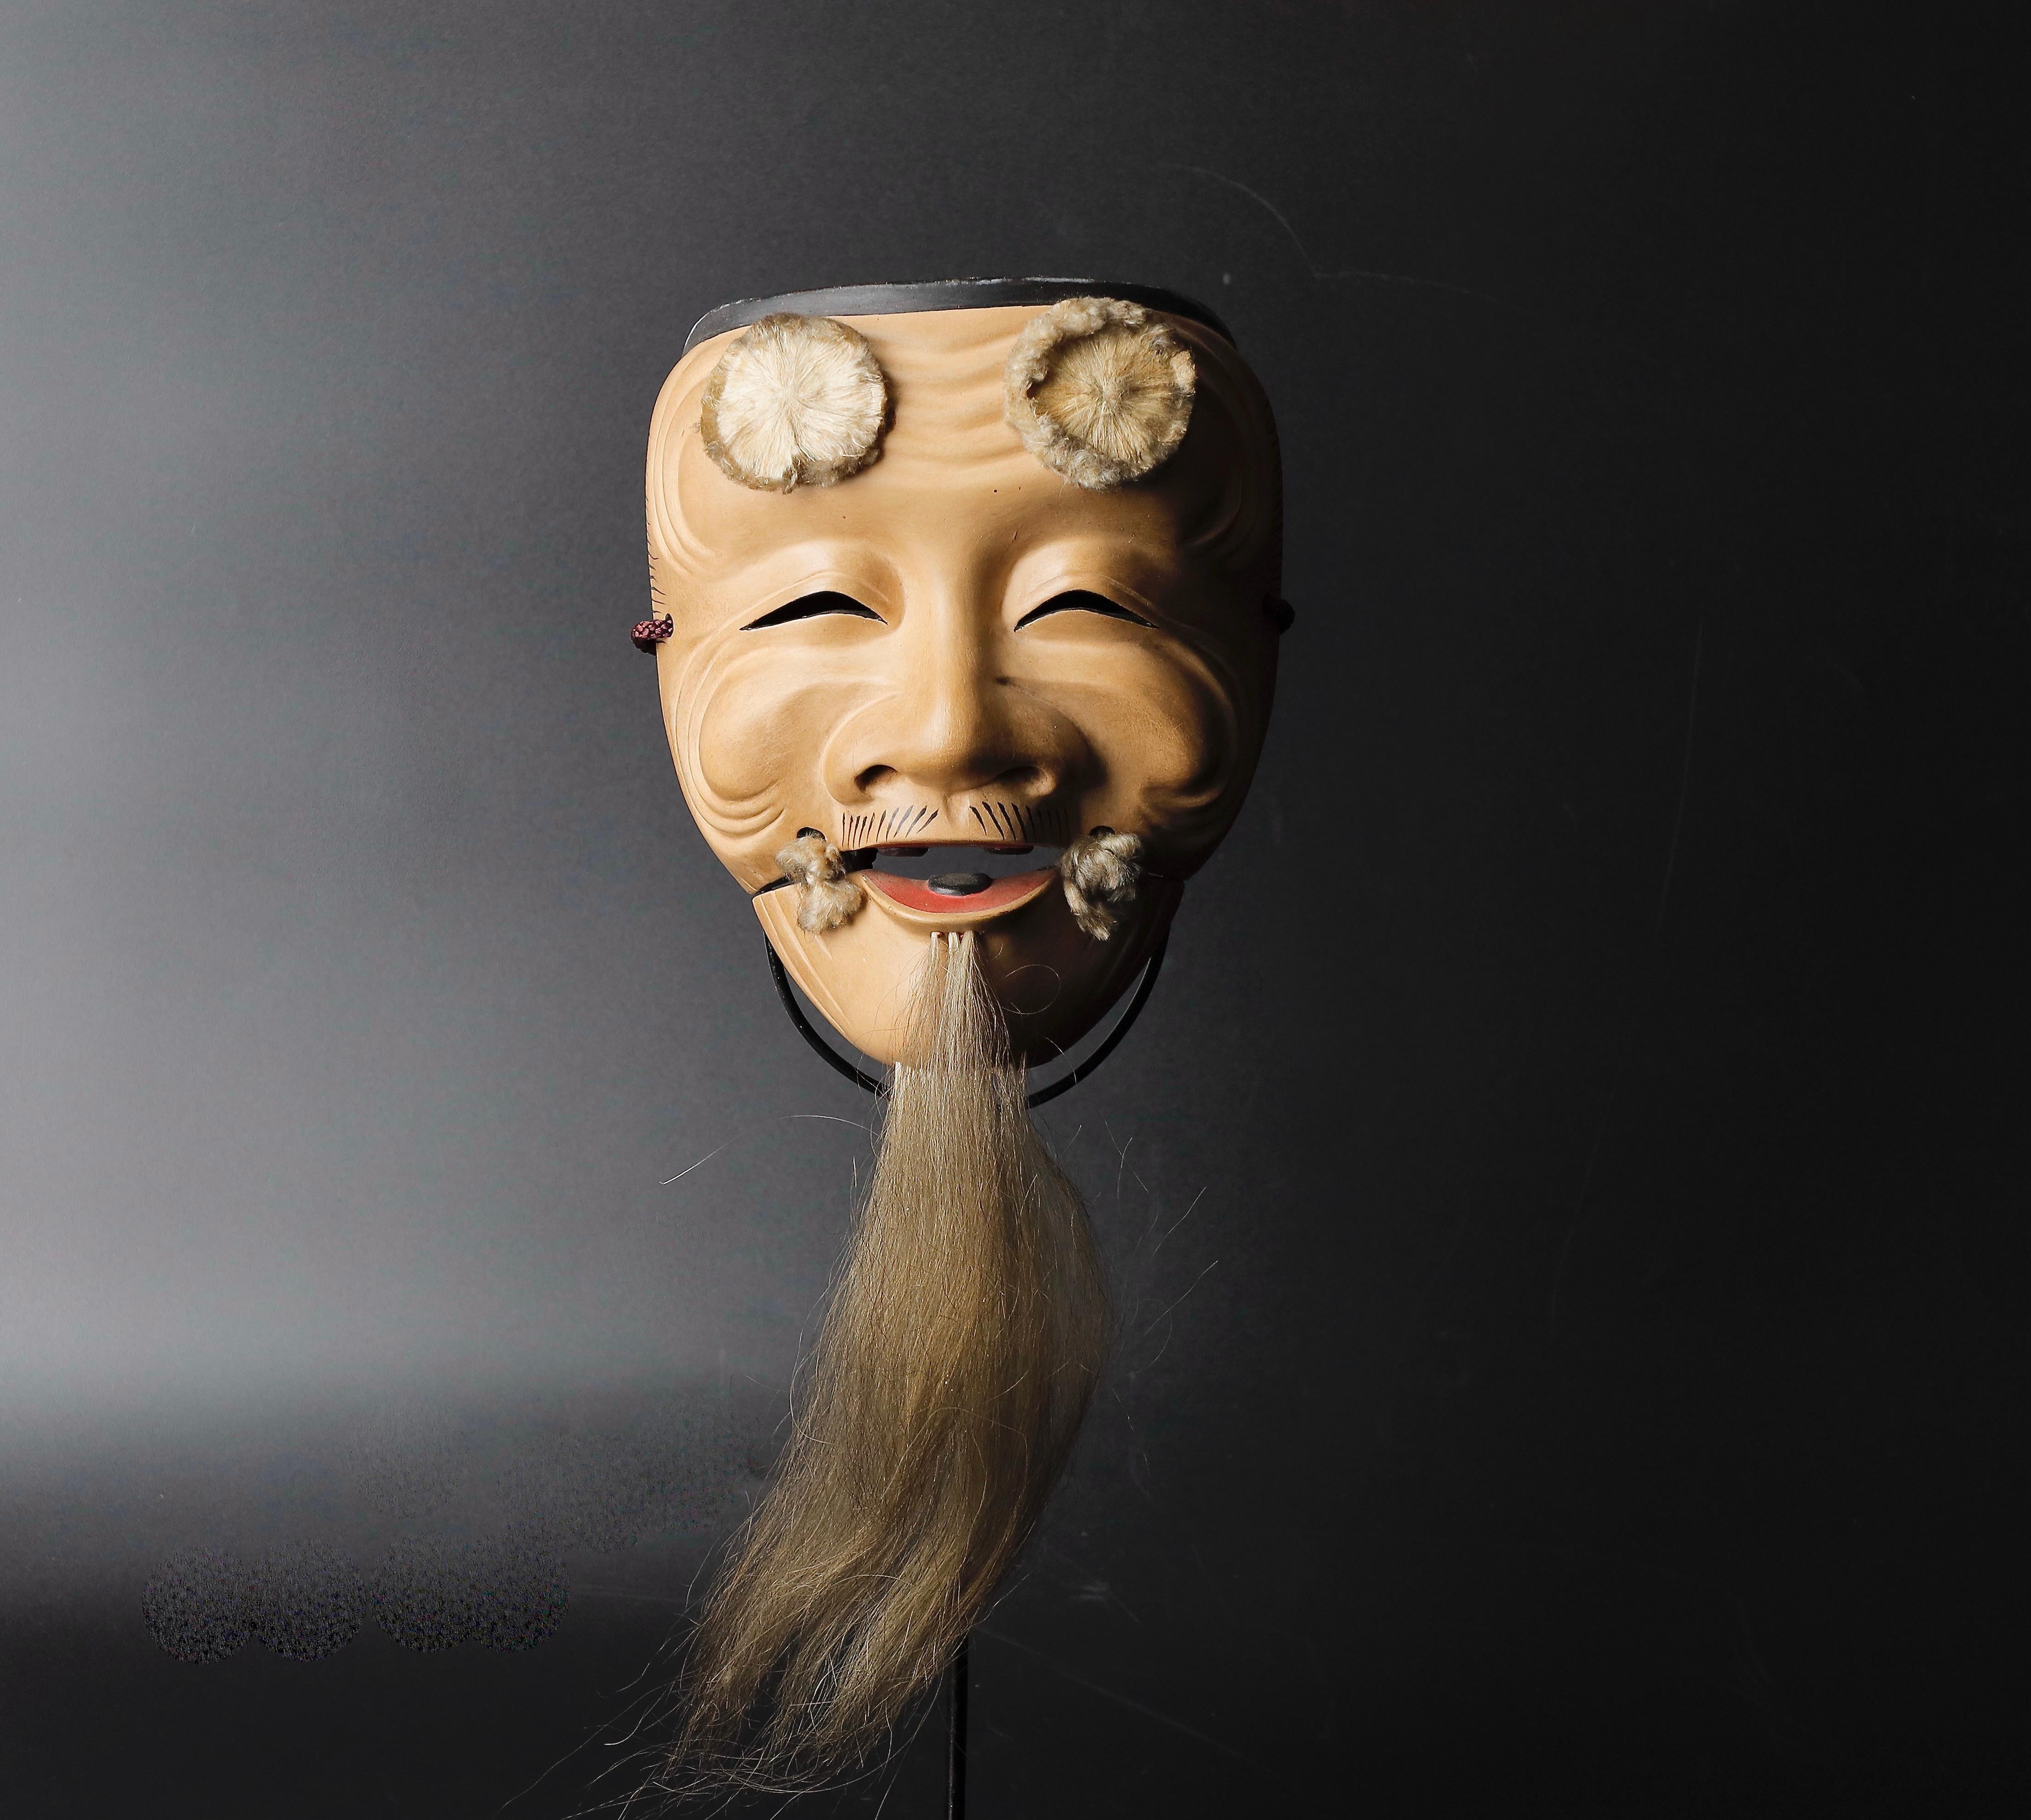 Singed Okina Noh mask old male with long white beard expressing wisdom
Mid 20 th century 
Size: 15 x 19 x8 cm ( 6x 7.5 x 3 inch ) 
Weight: 230g ( 0.5 lb ) 
Material: wood with gofun paint
Small crack under the long beard , please refer photos